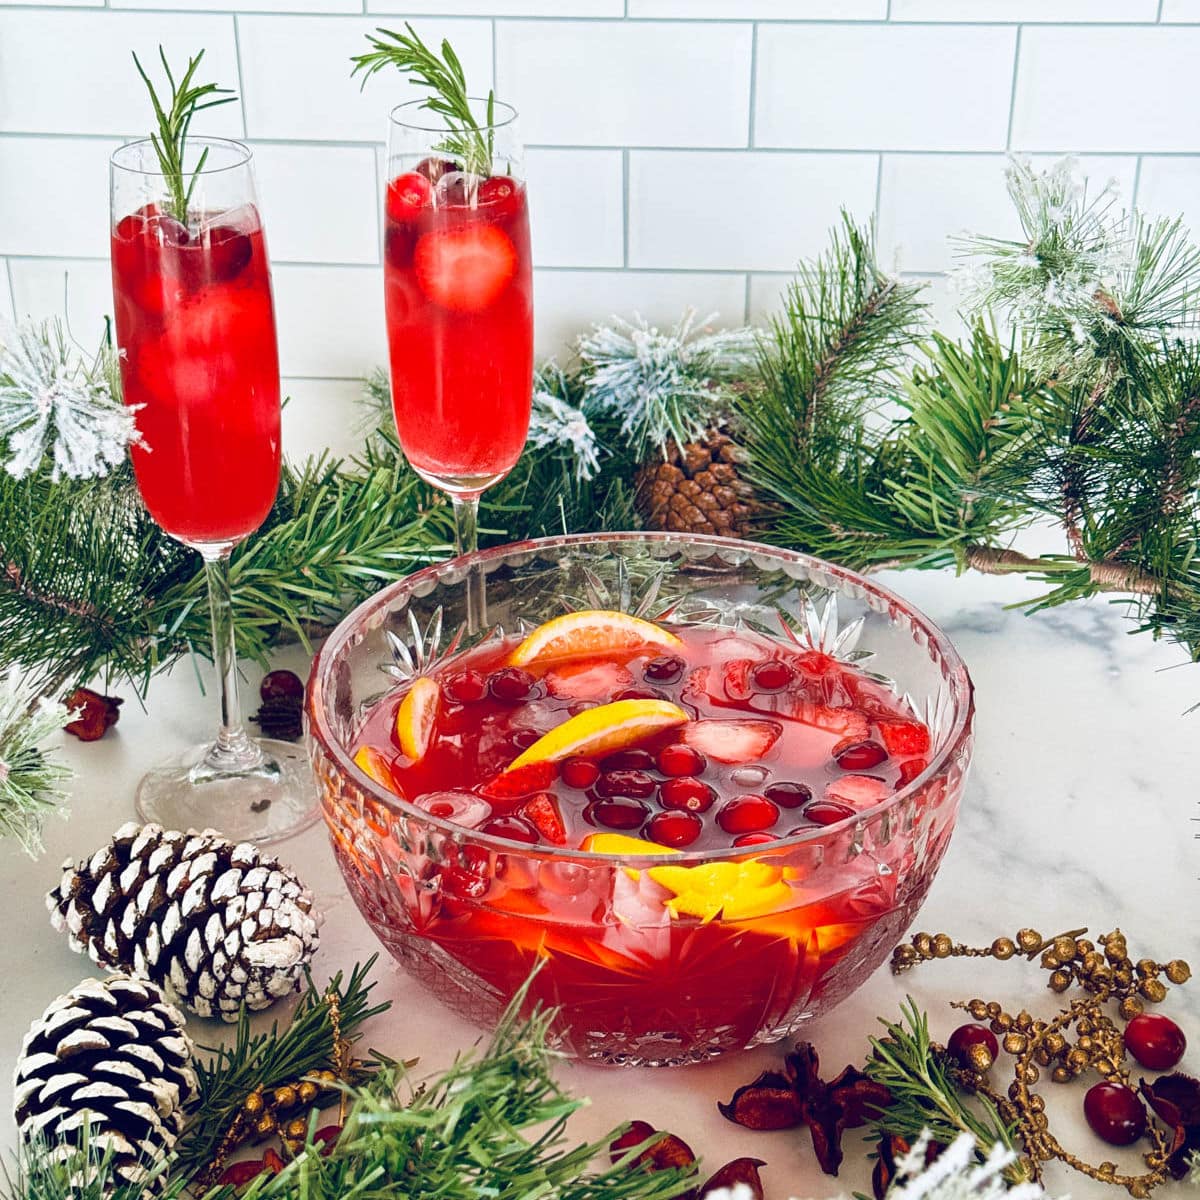 Best Christmas Punch Recipe for that Holiday Party